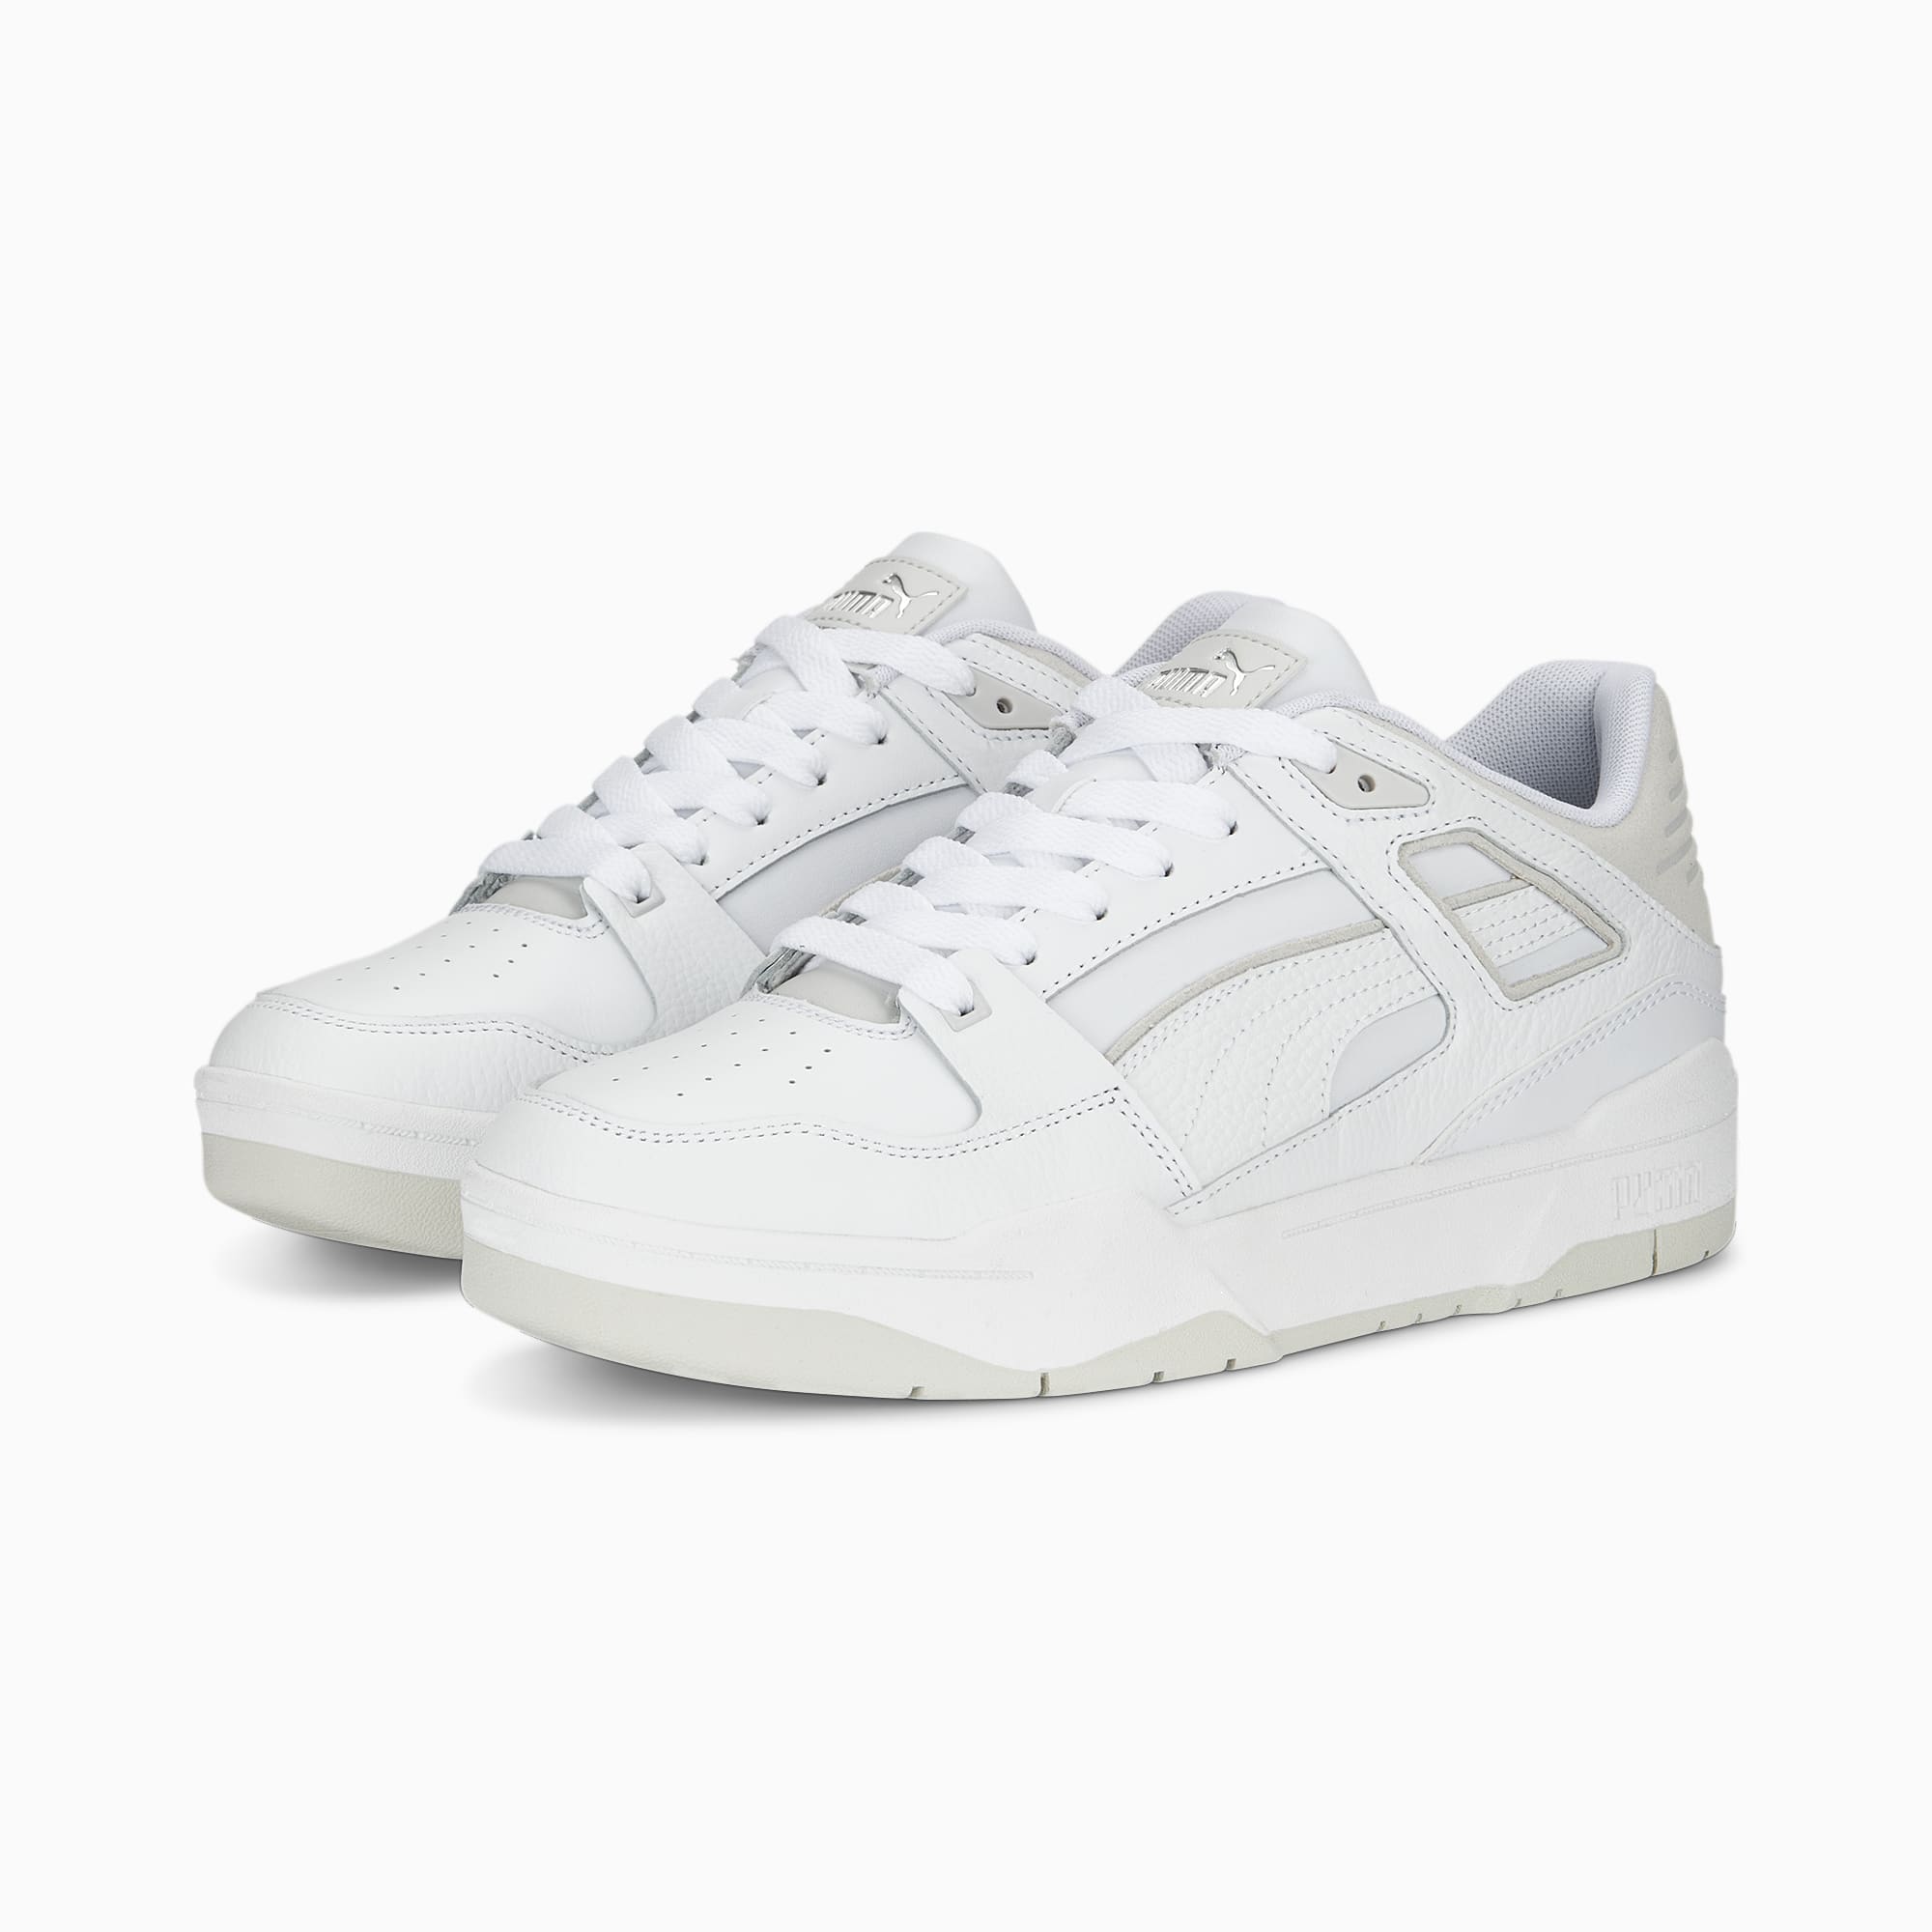 PUMA Chaussure Sneakers Slipstream Pour Homme, Blanc